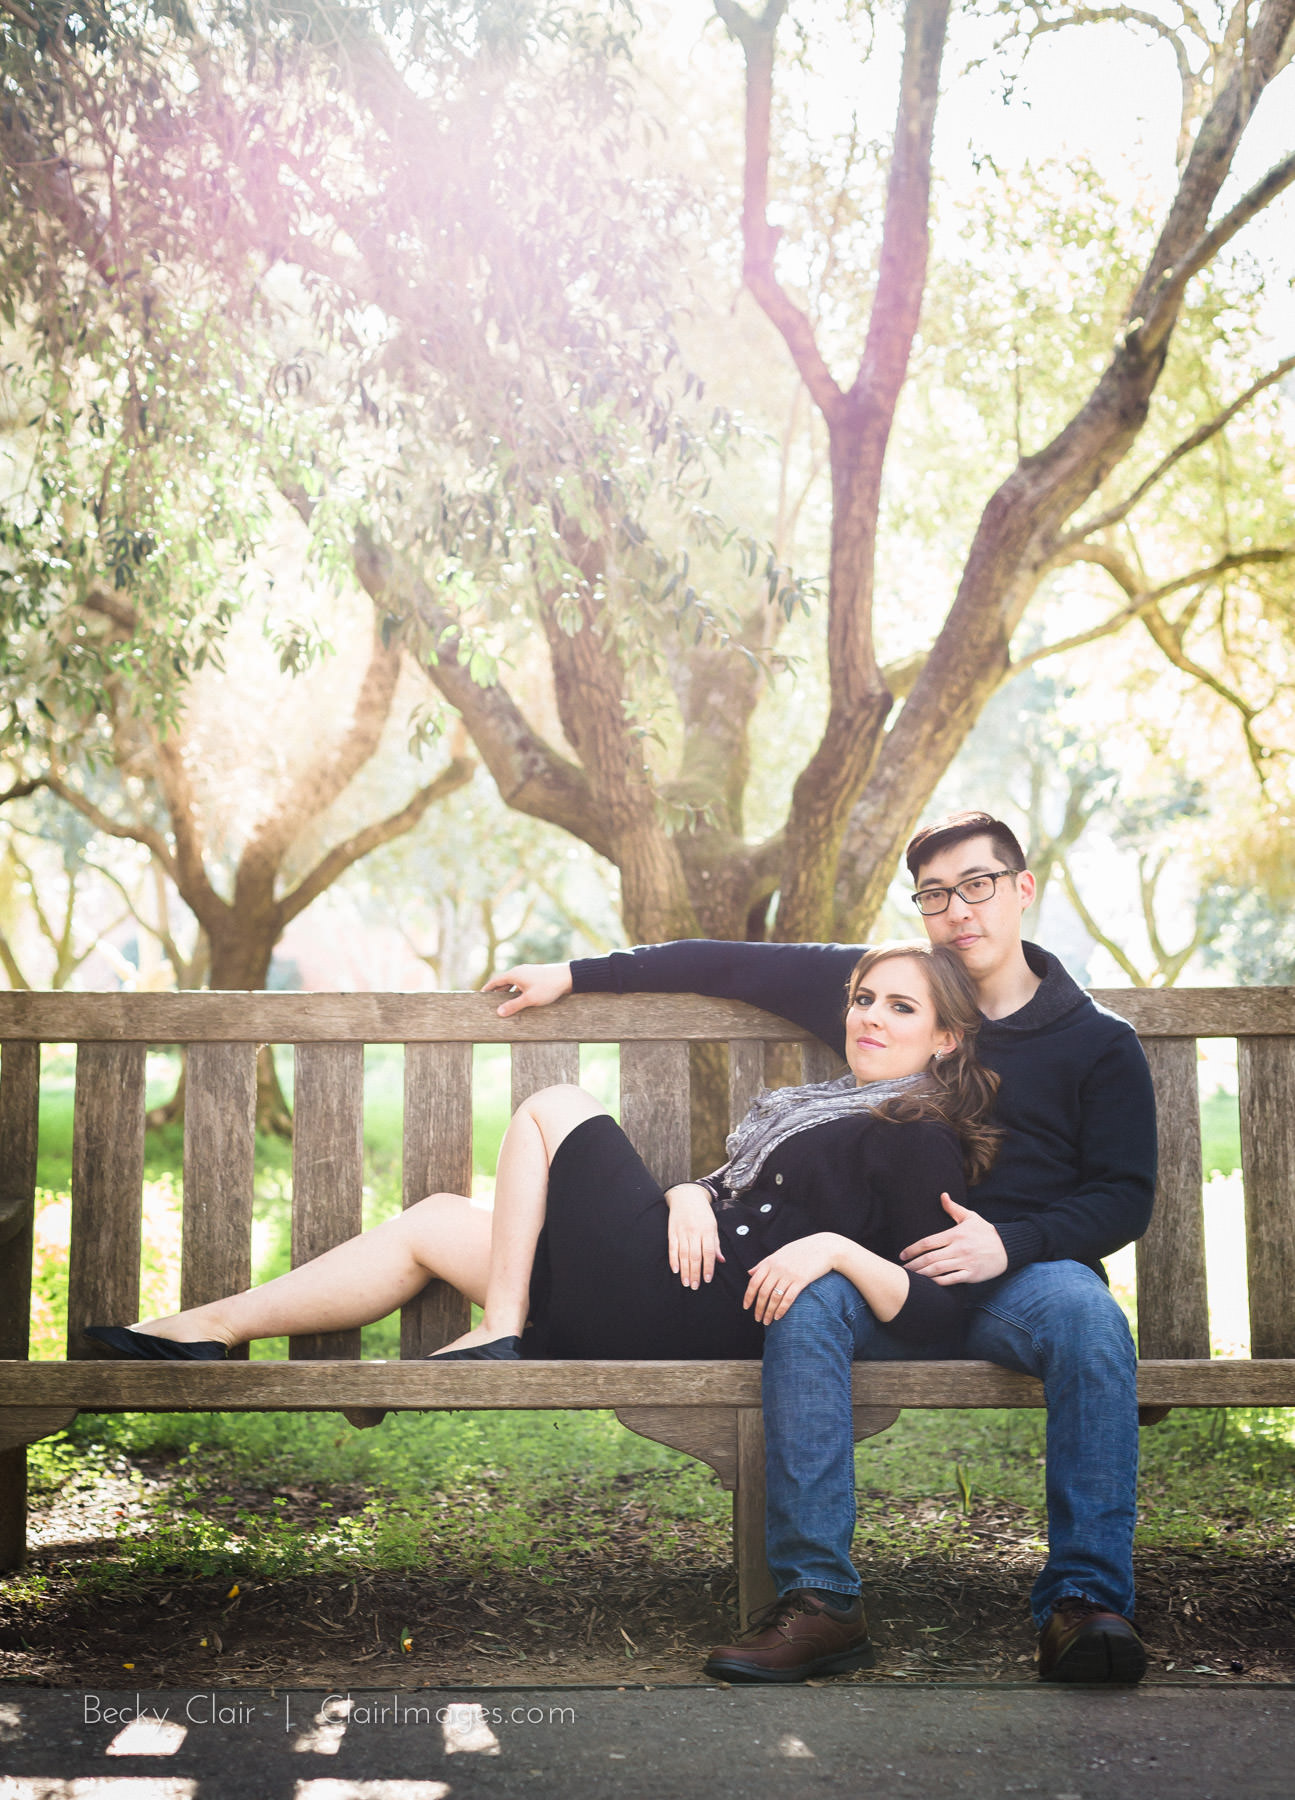 Filoli Engagement Session - Clair Images - Bay Area Wedding Photography